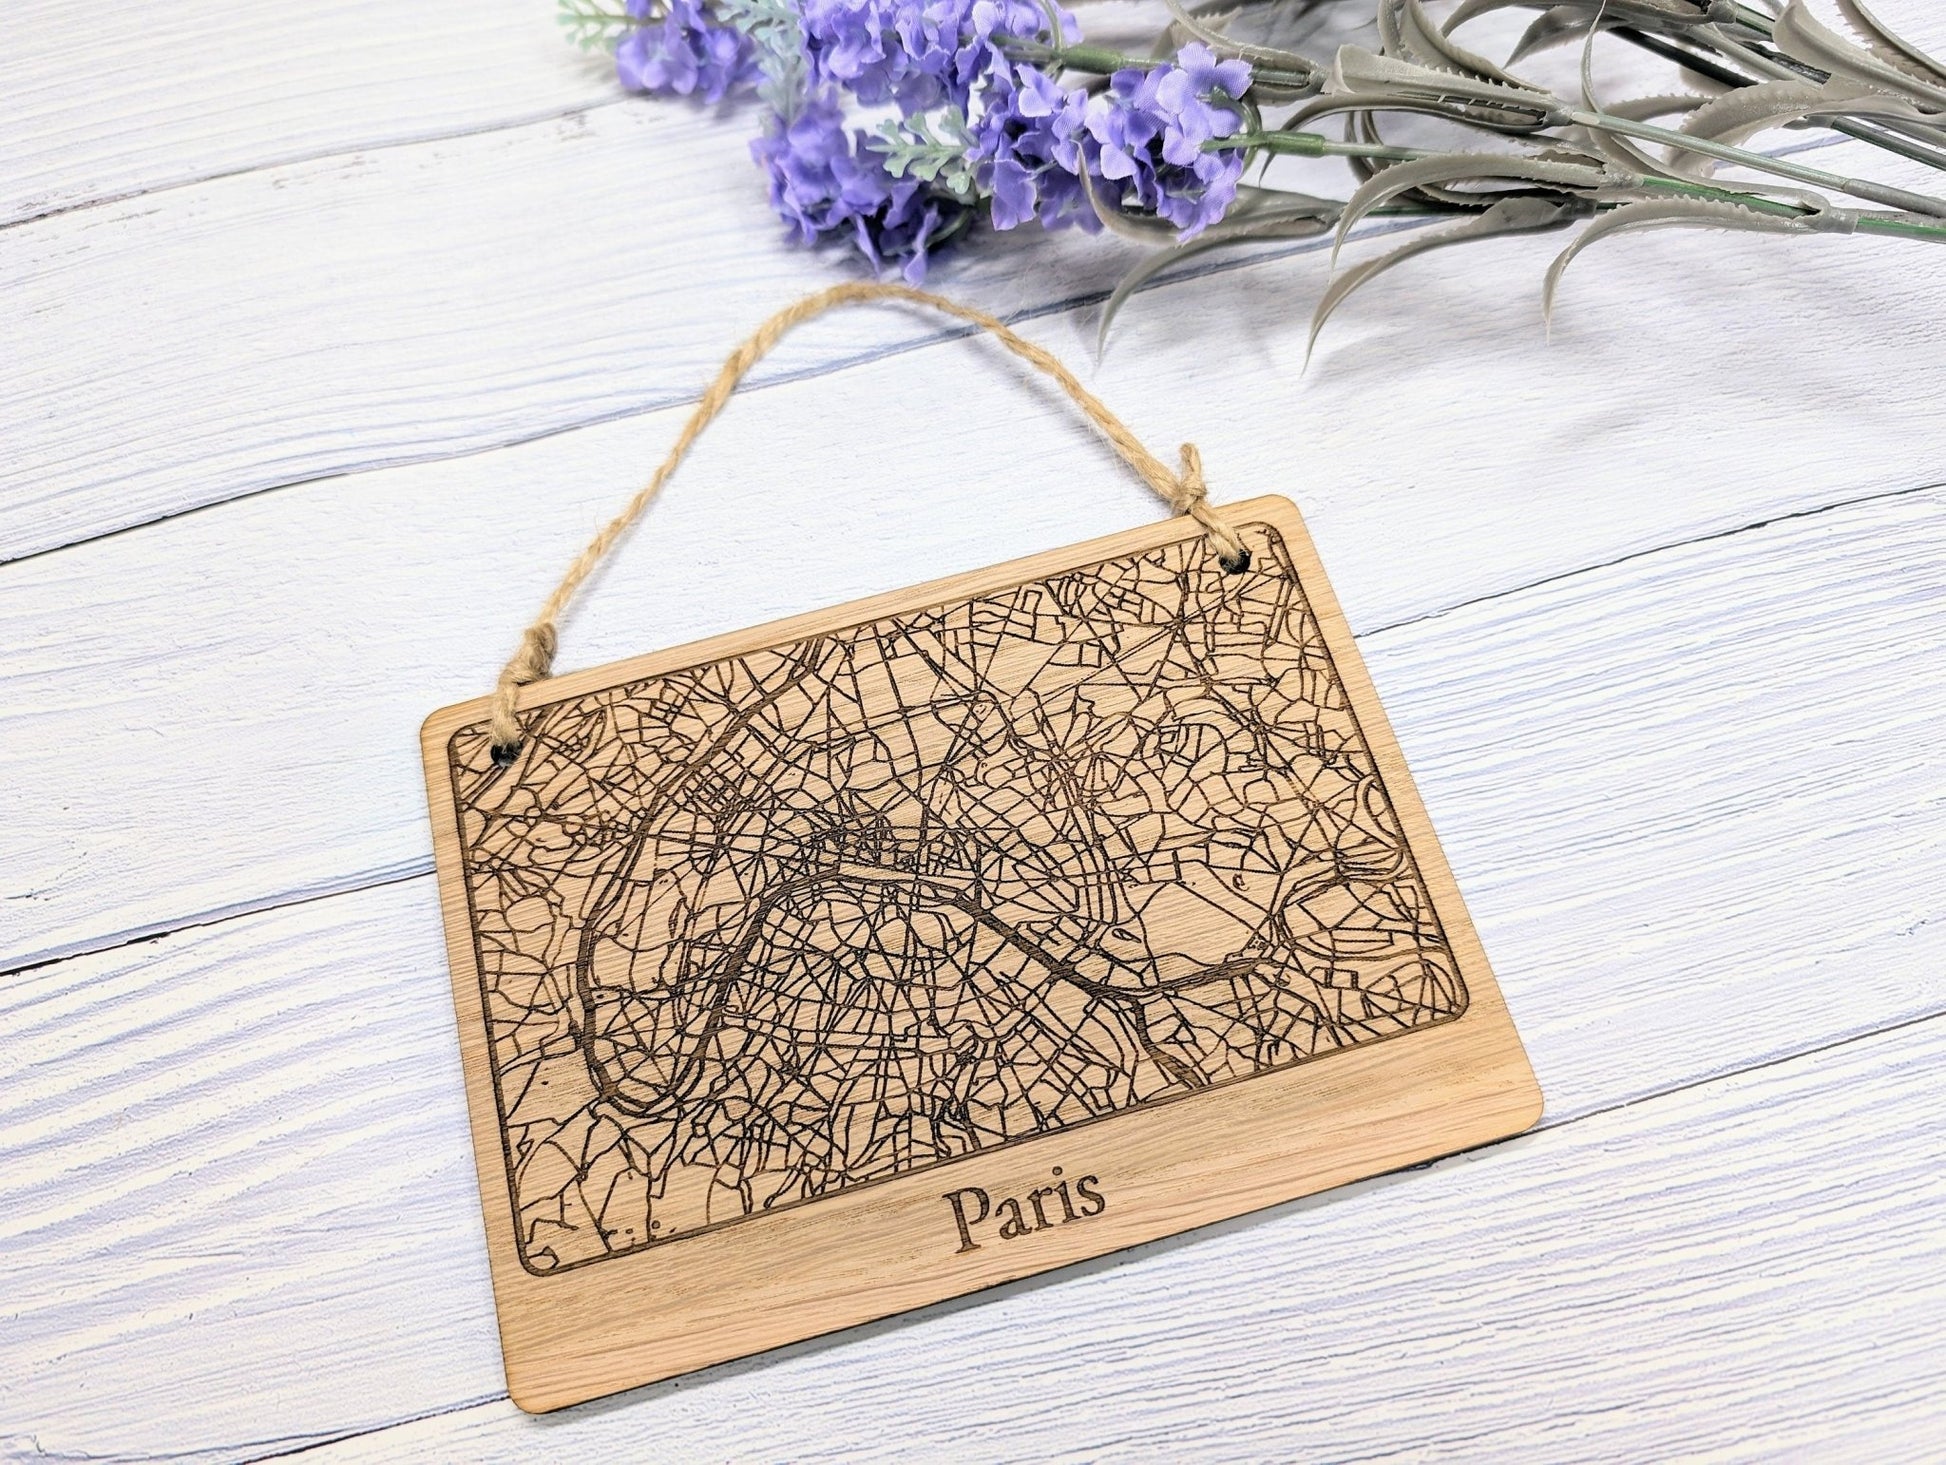 Handcrafted Wooden Map Wall Art of Paris, UK - Available in 4 Sizes - Perfect Home Decor or Unique Gift - CherryGroveCraft